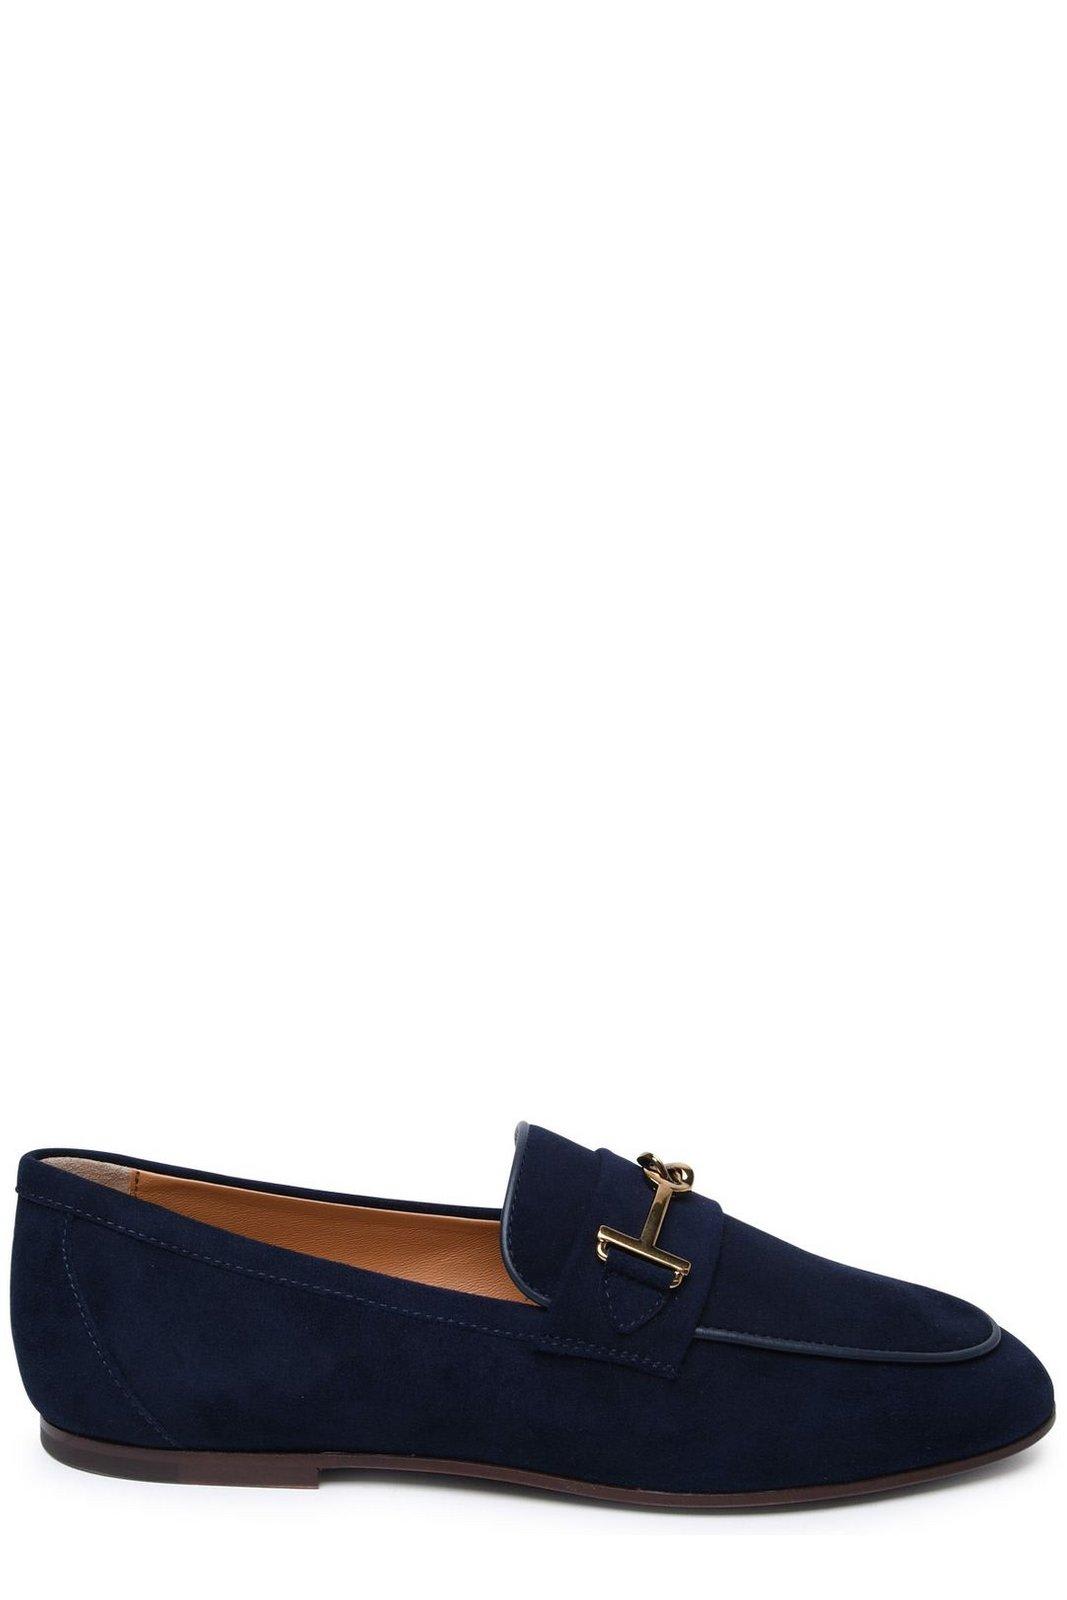 TOD'S 79A T-RING LOAFERS